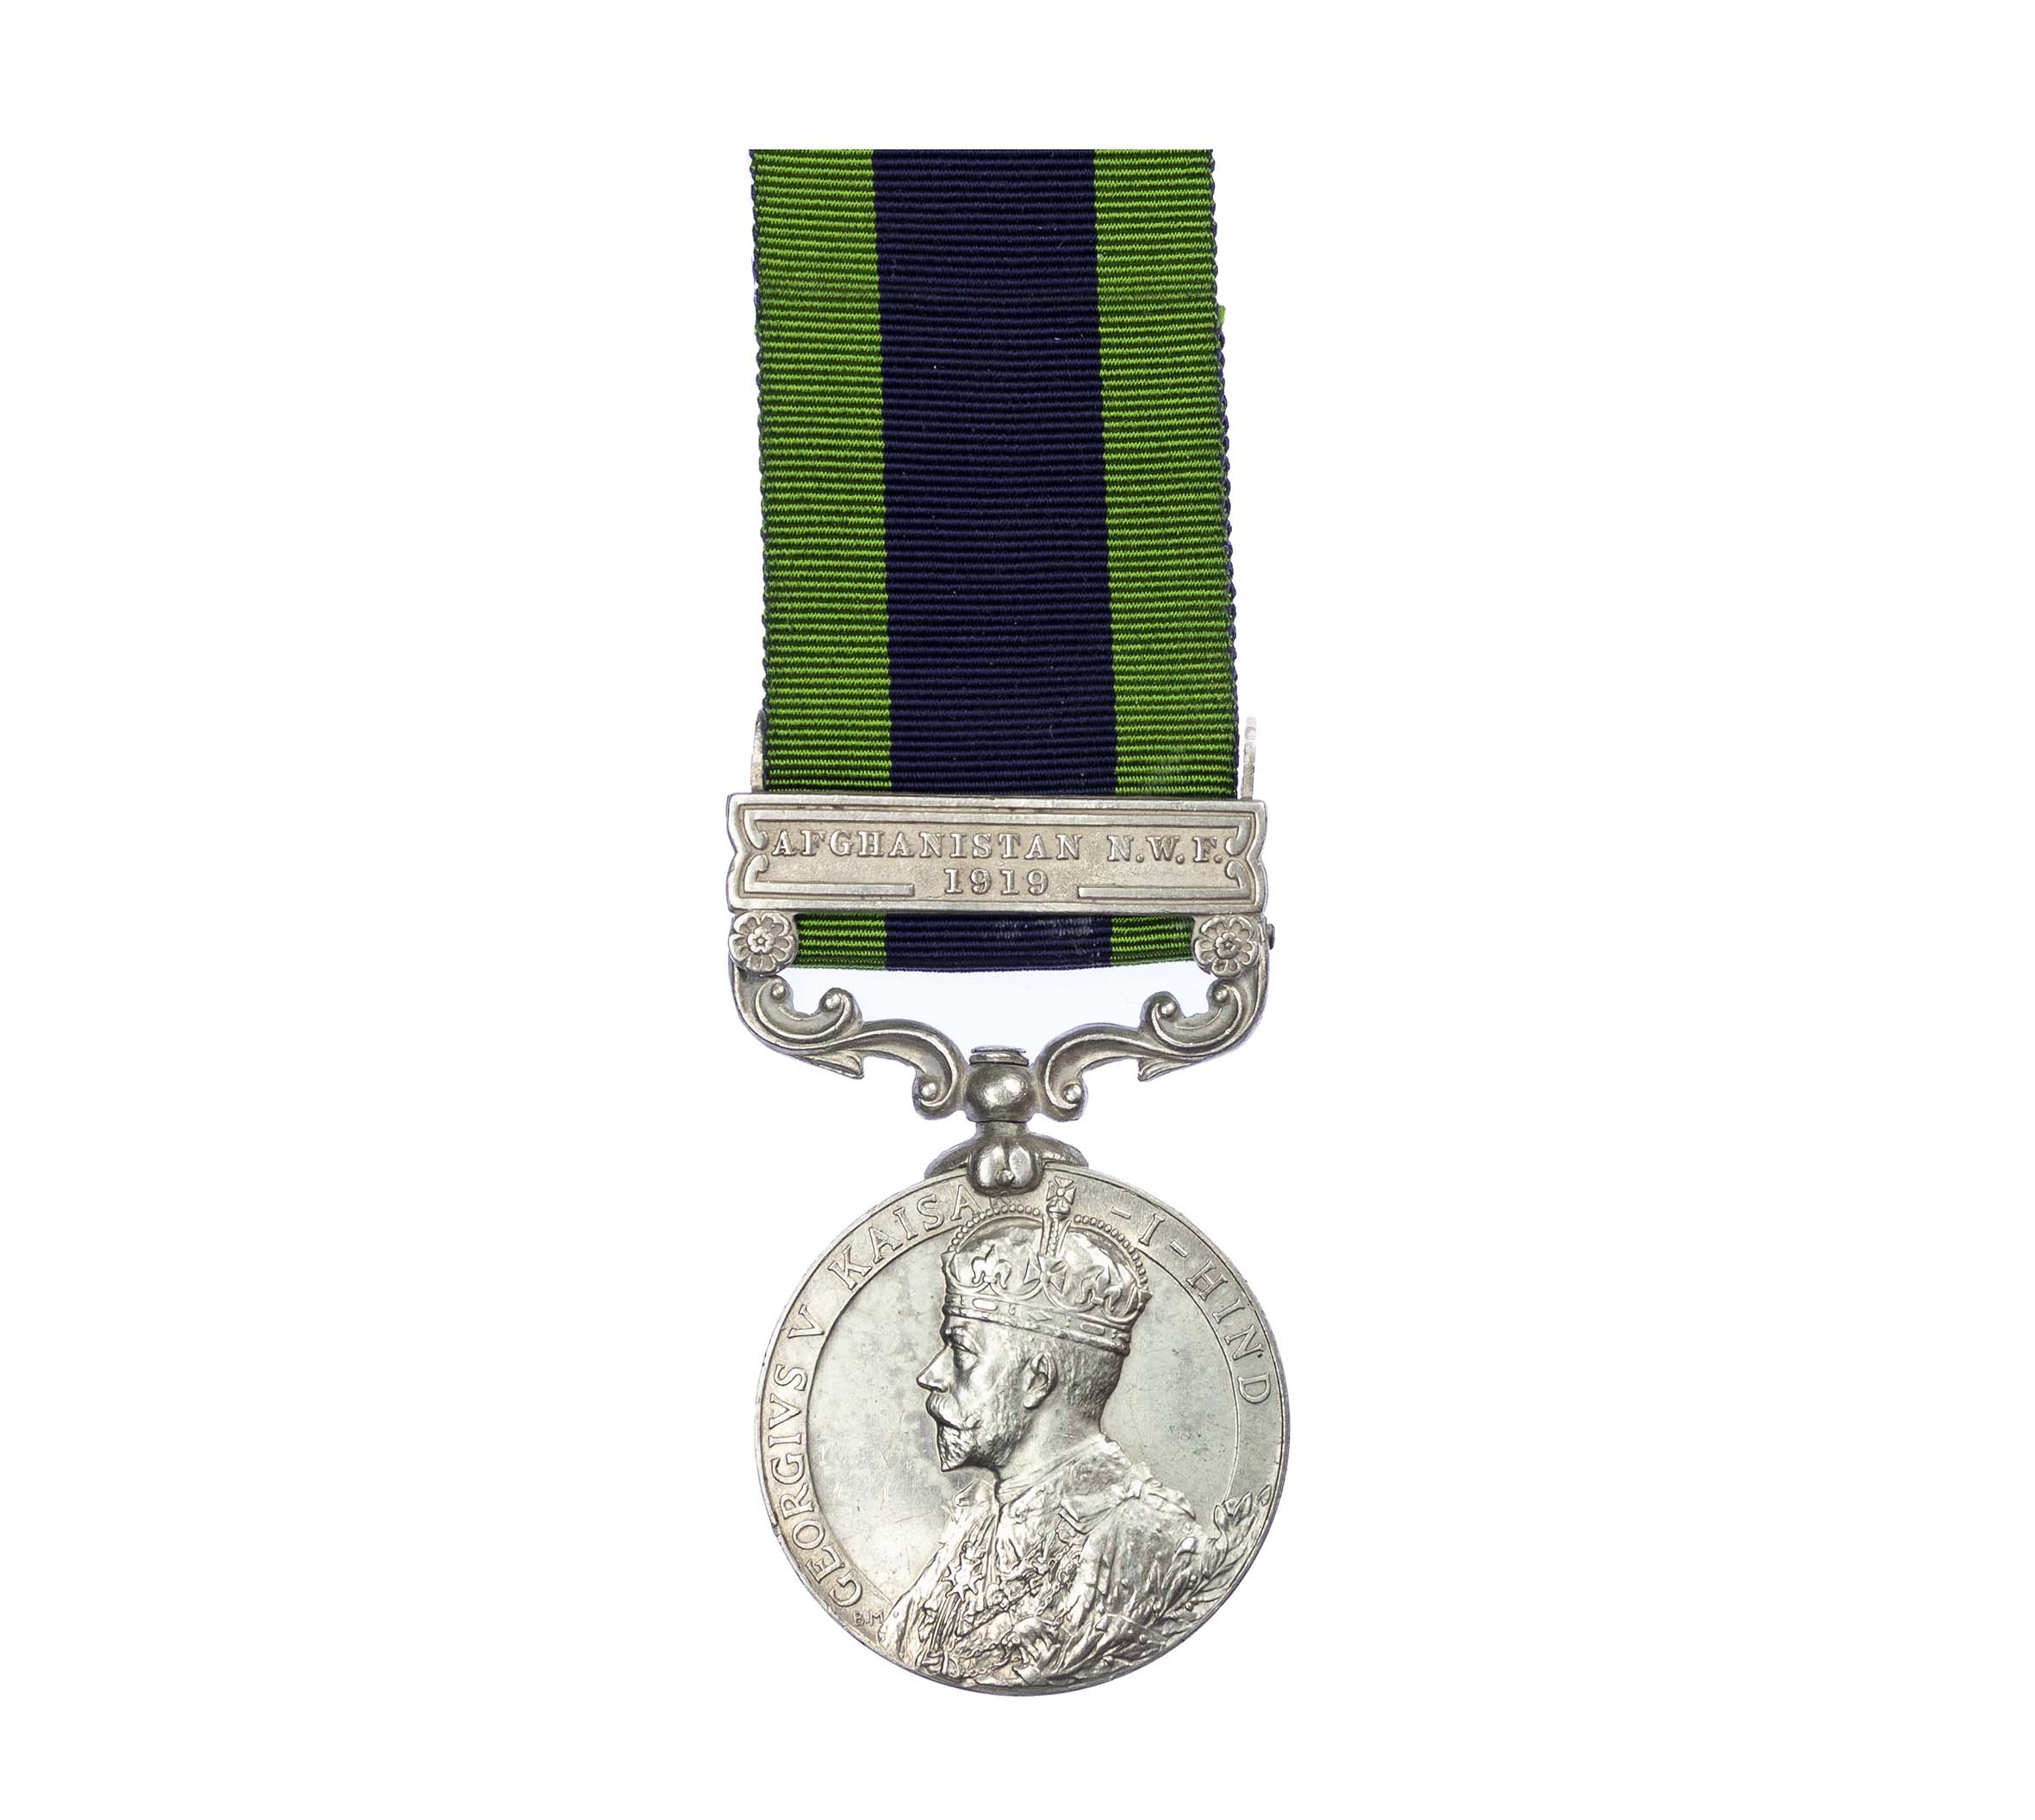 India General Service Medal 1908-1935, GVR, one clasp Afghanistan N.W.F. 1919, to Havildar Mohd Sher